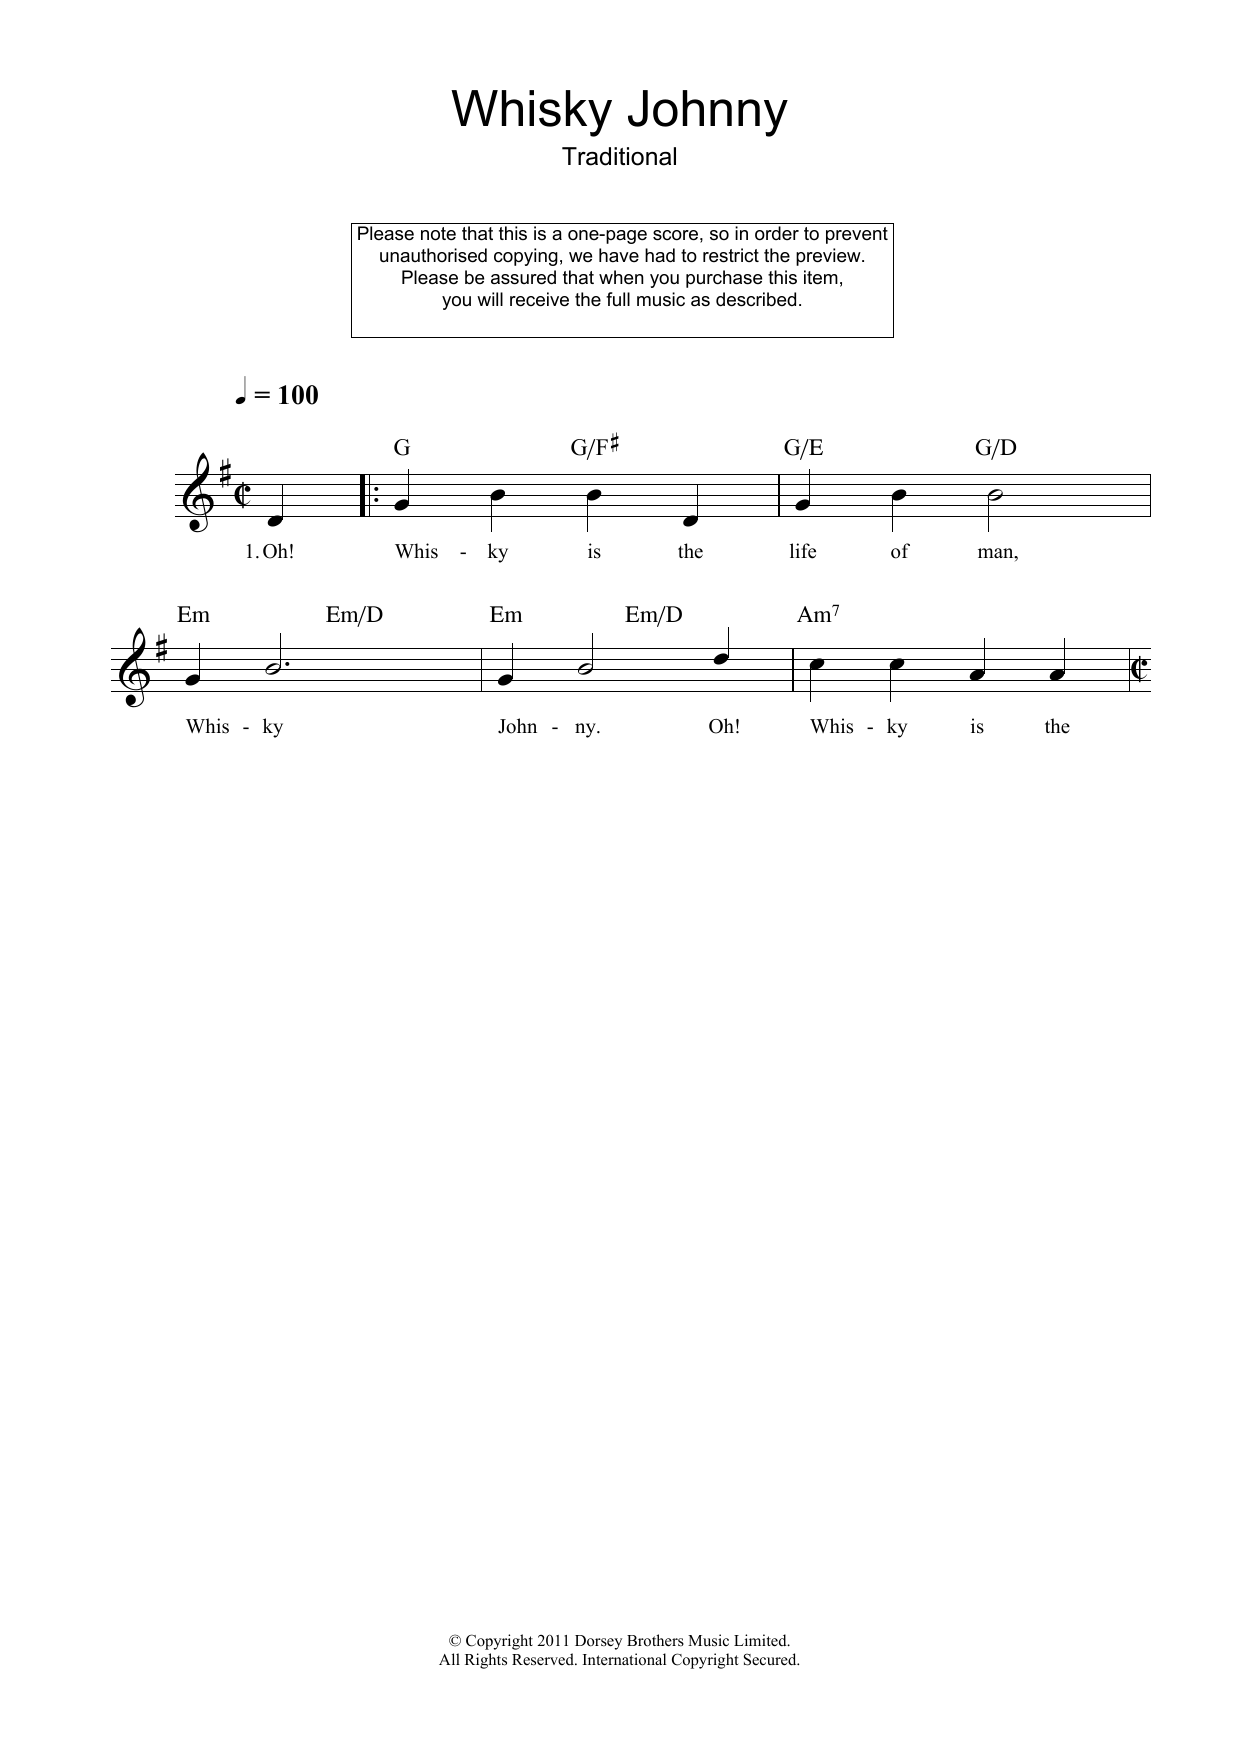 Download Traditional Whisky Johnny Sheet Music